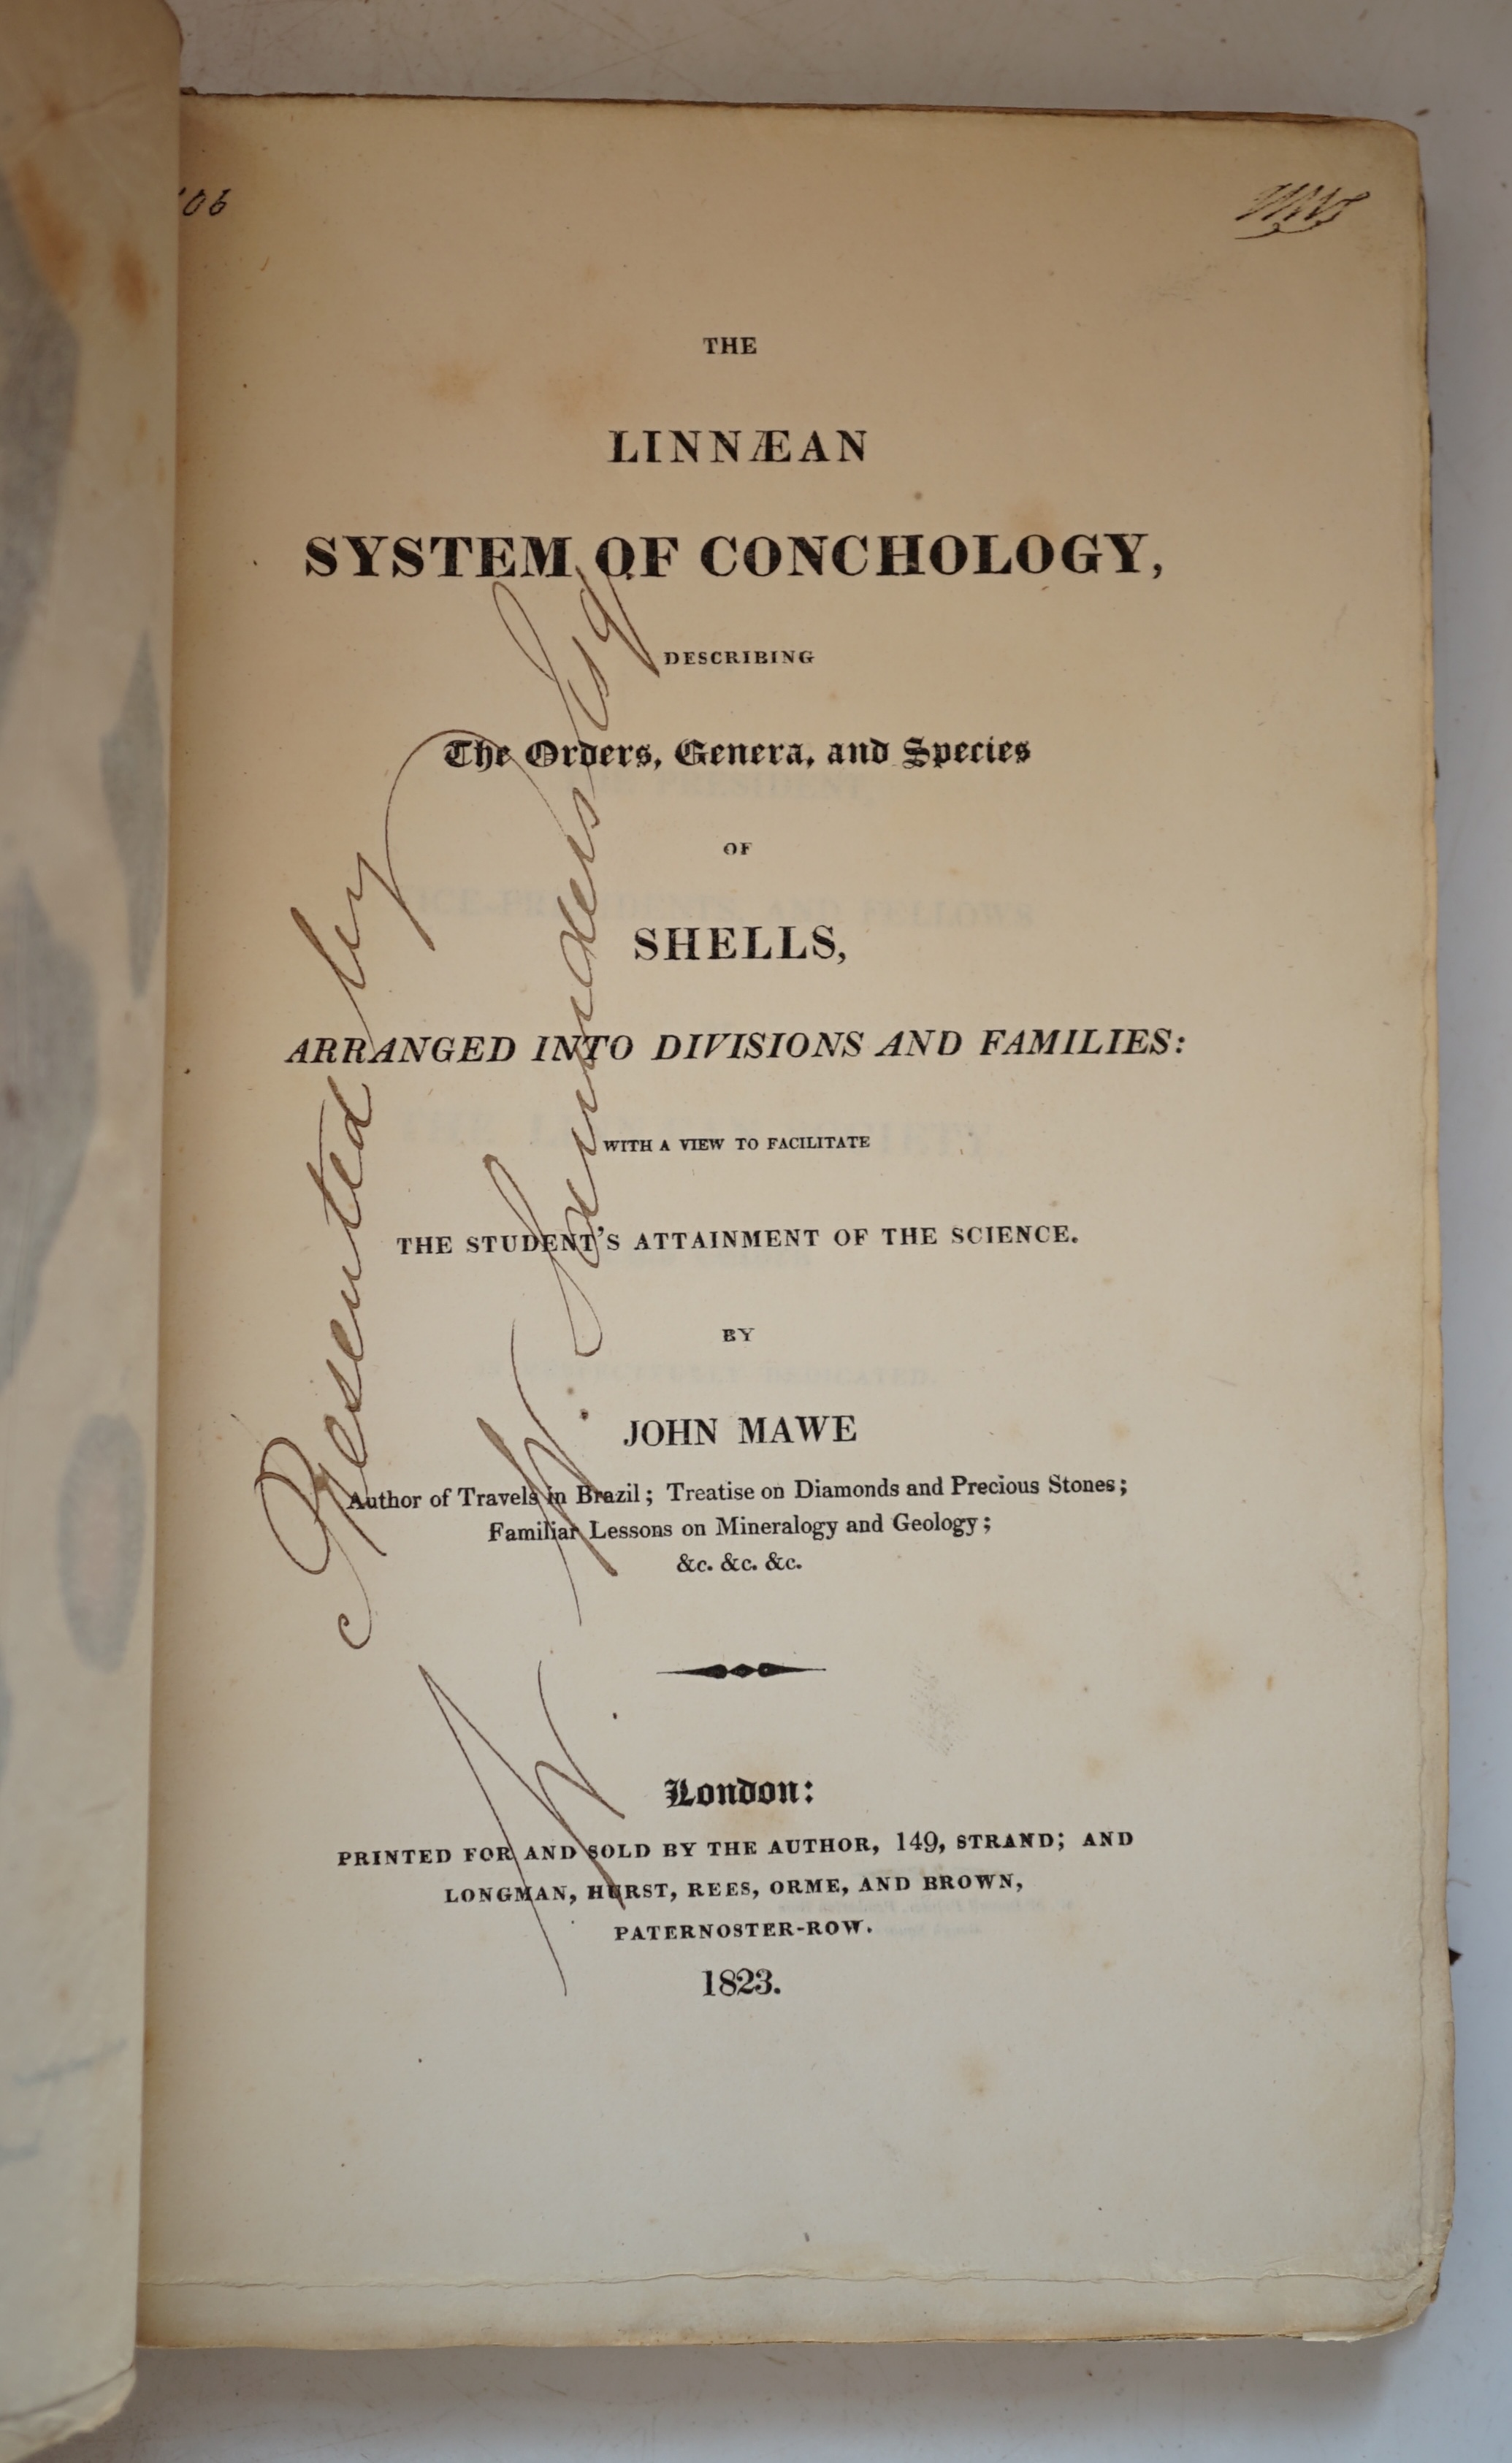 Conchology.- Mawe, John - The Linnæan System of Conchology, 1st edition, 8vo, paper cover boards, rebacked and re-labelled, hand-coloured frontispiece and 36 lithographs, contemporary ink presentation inscription to titl